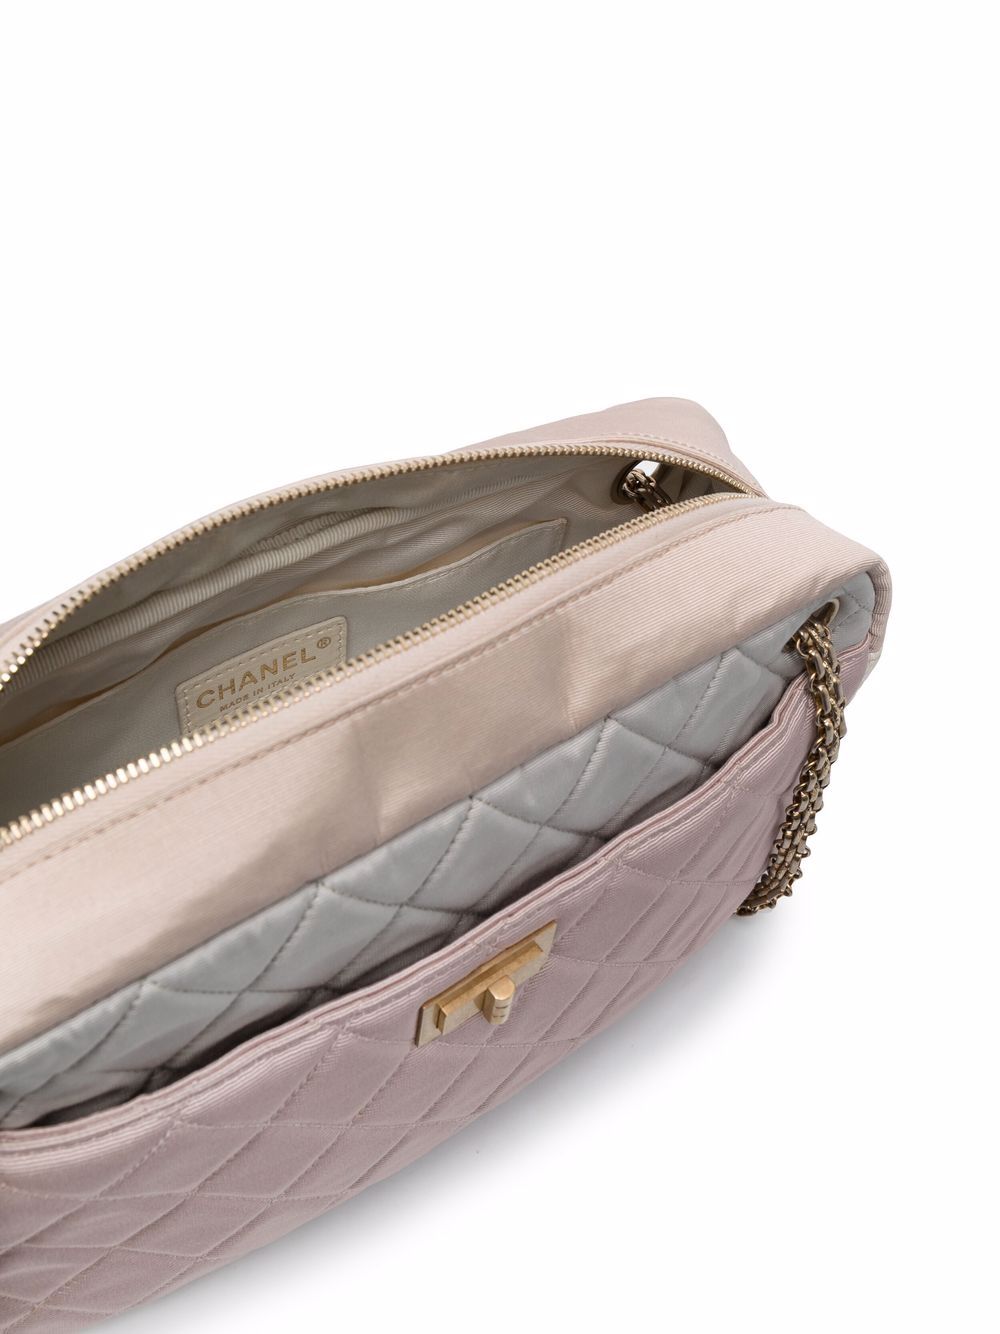 Chanel Pre-owned 2008 Diamond-Quilted Silk Shoulder Bag - Pink